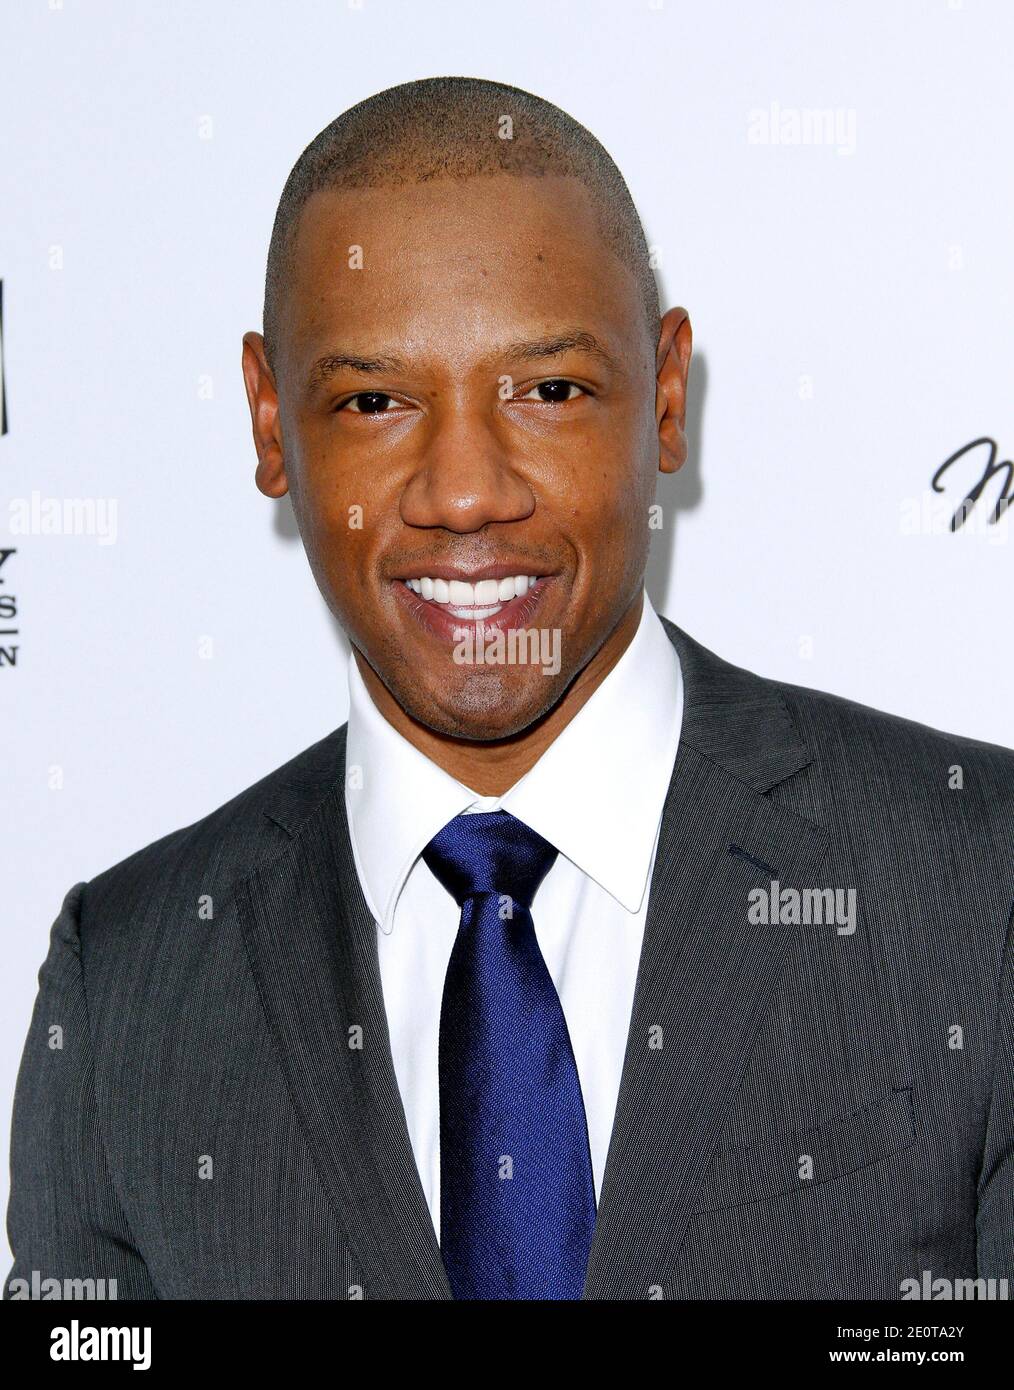 Tory Kittles attends the Steel Magnolias Premiere at the Paris Theater in New York City, NY, USA, on October 3, 2012. Photo by Donna Ward/ABACAPRESS.COM Stock Photo